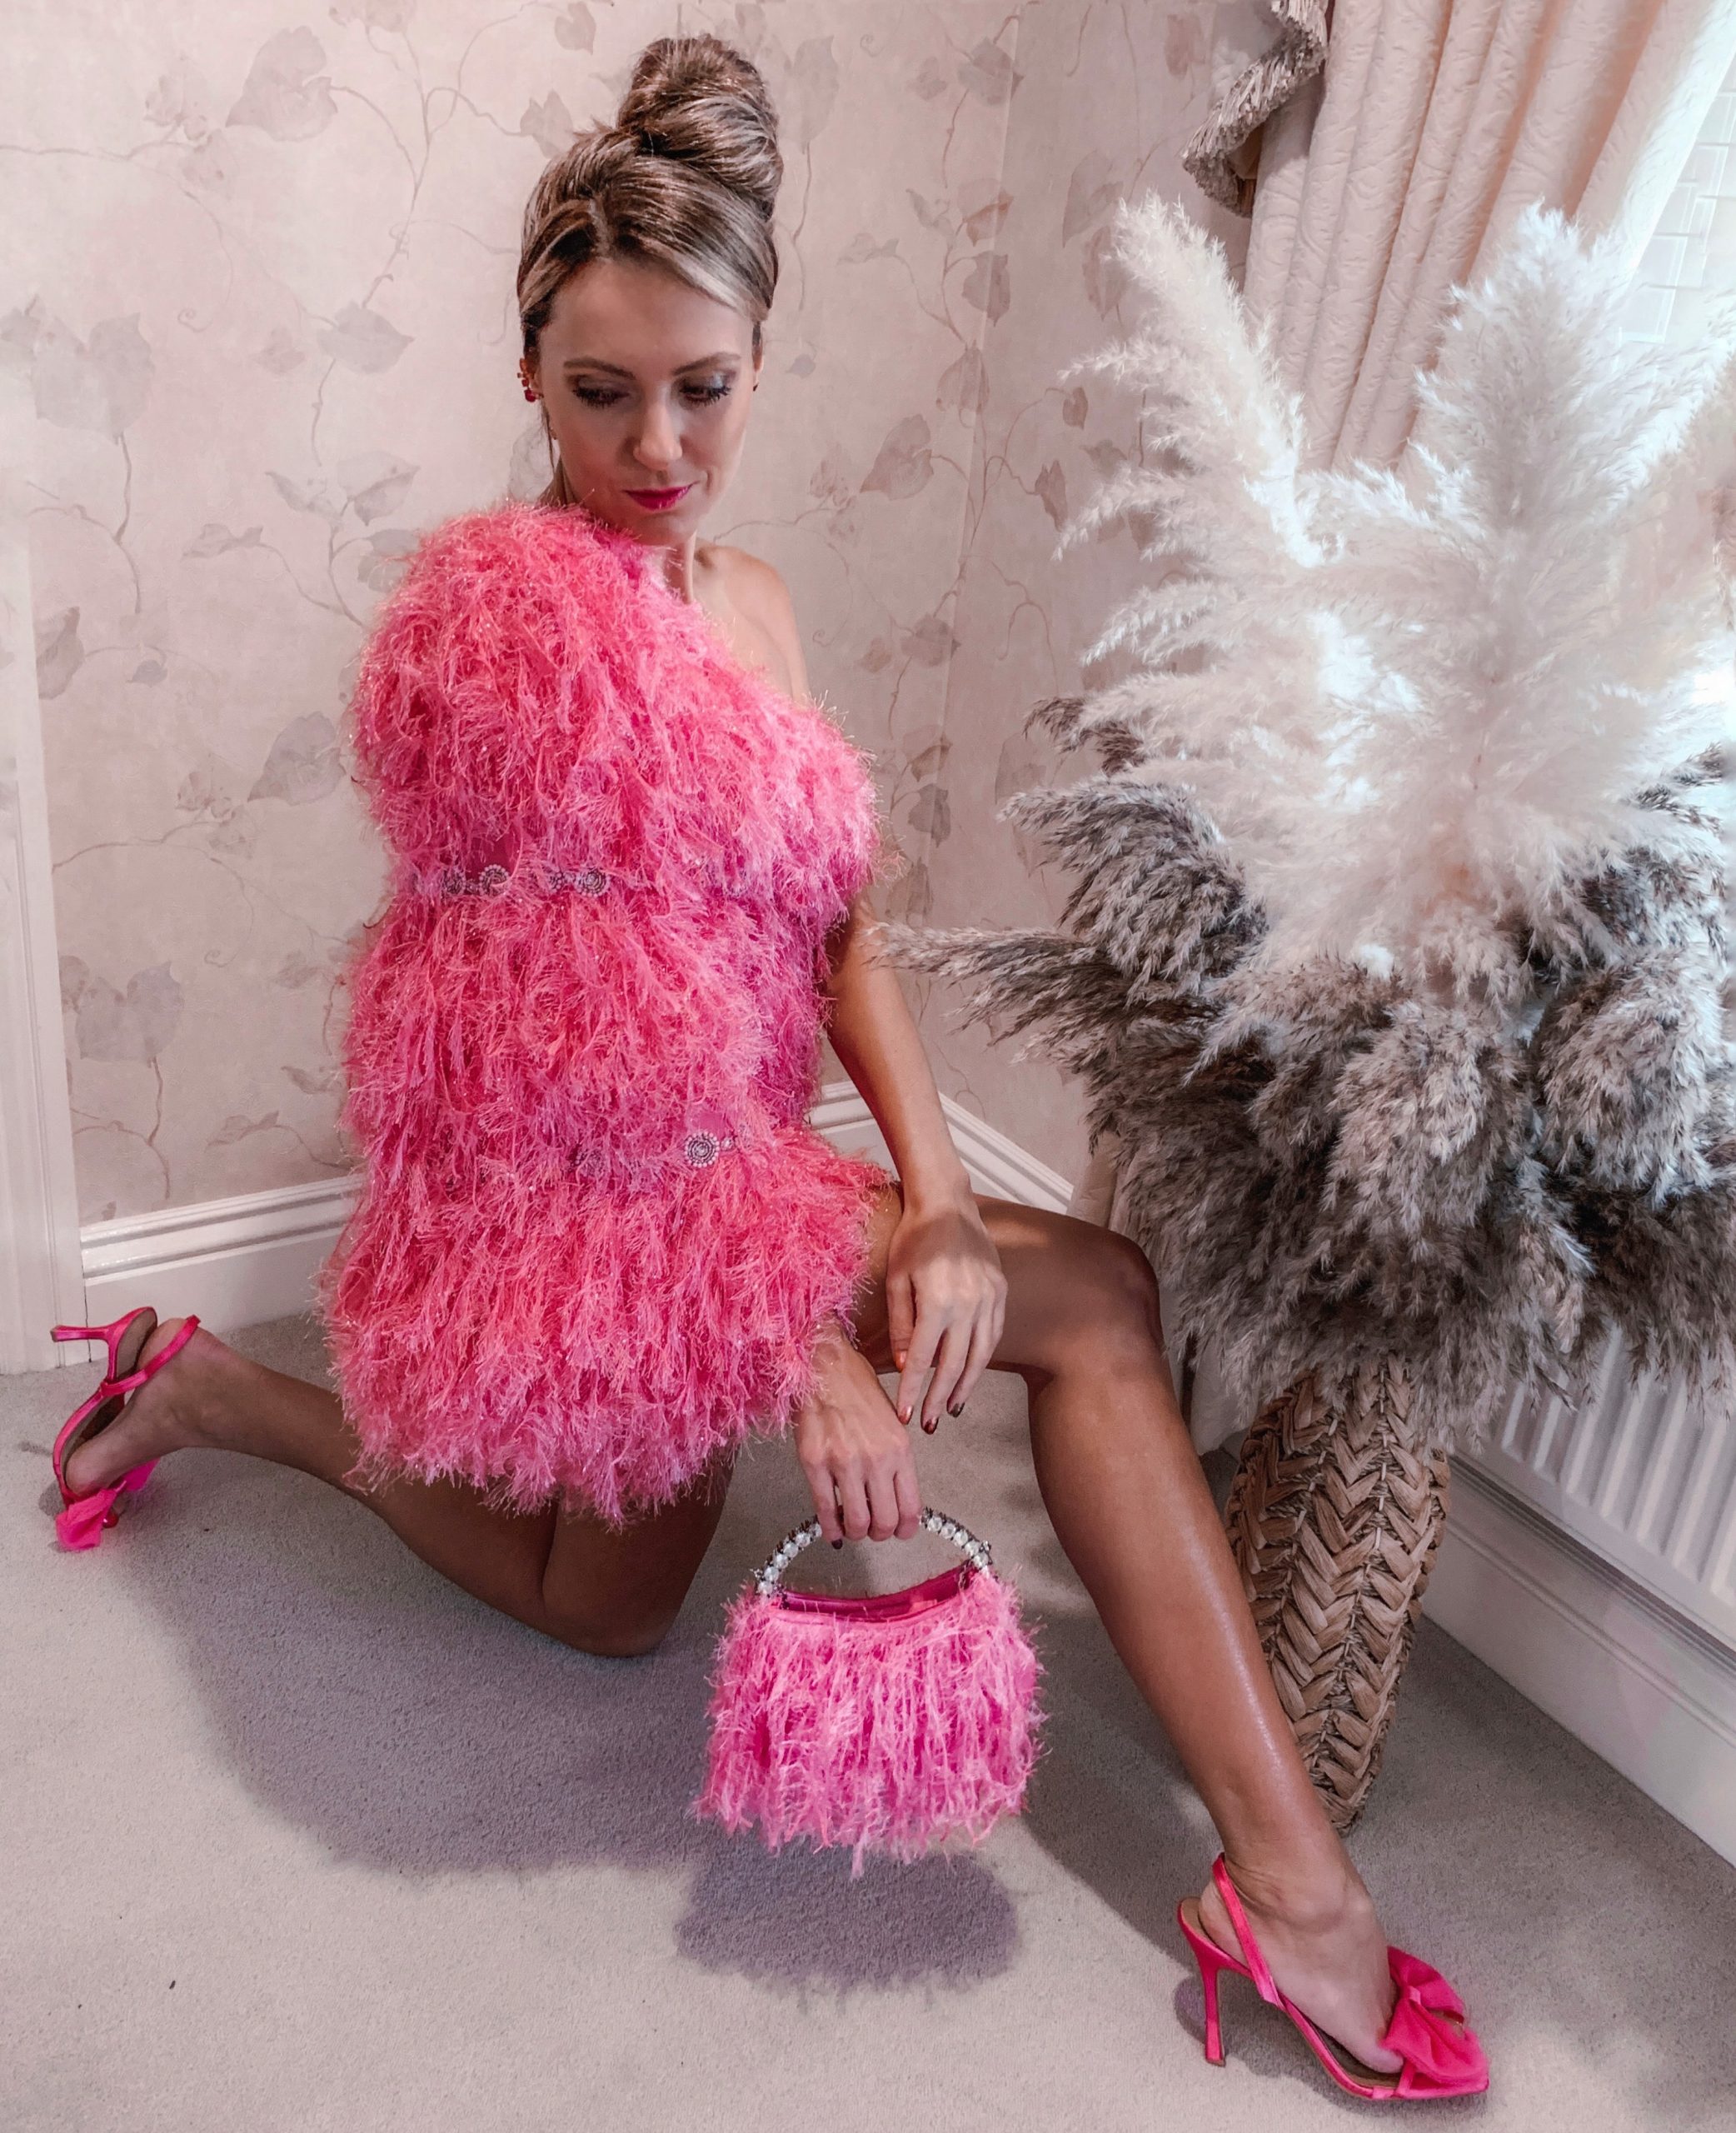 ASOS Luxe all over faux feather one sleeve mini dress in pink | Dune London Black Bonus Encrusted Heel Courts | ASOS clutch bag in feather with diamante top handle in pink | London Rebel bow sling back mid heel sandals in pink satin | Swarovski clip earrings